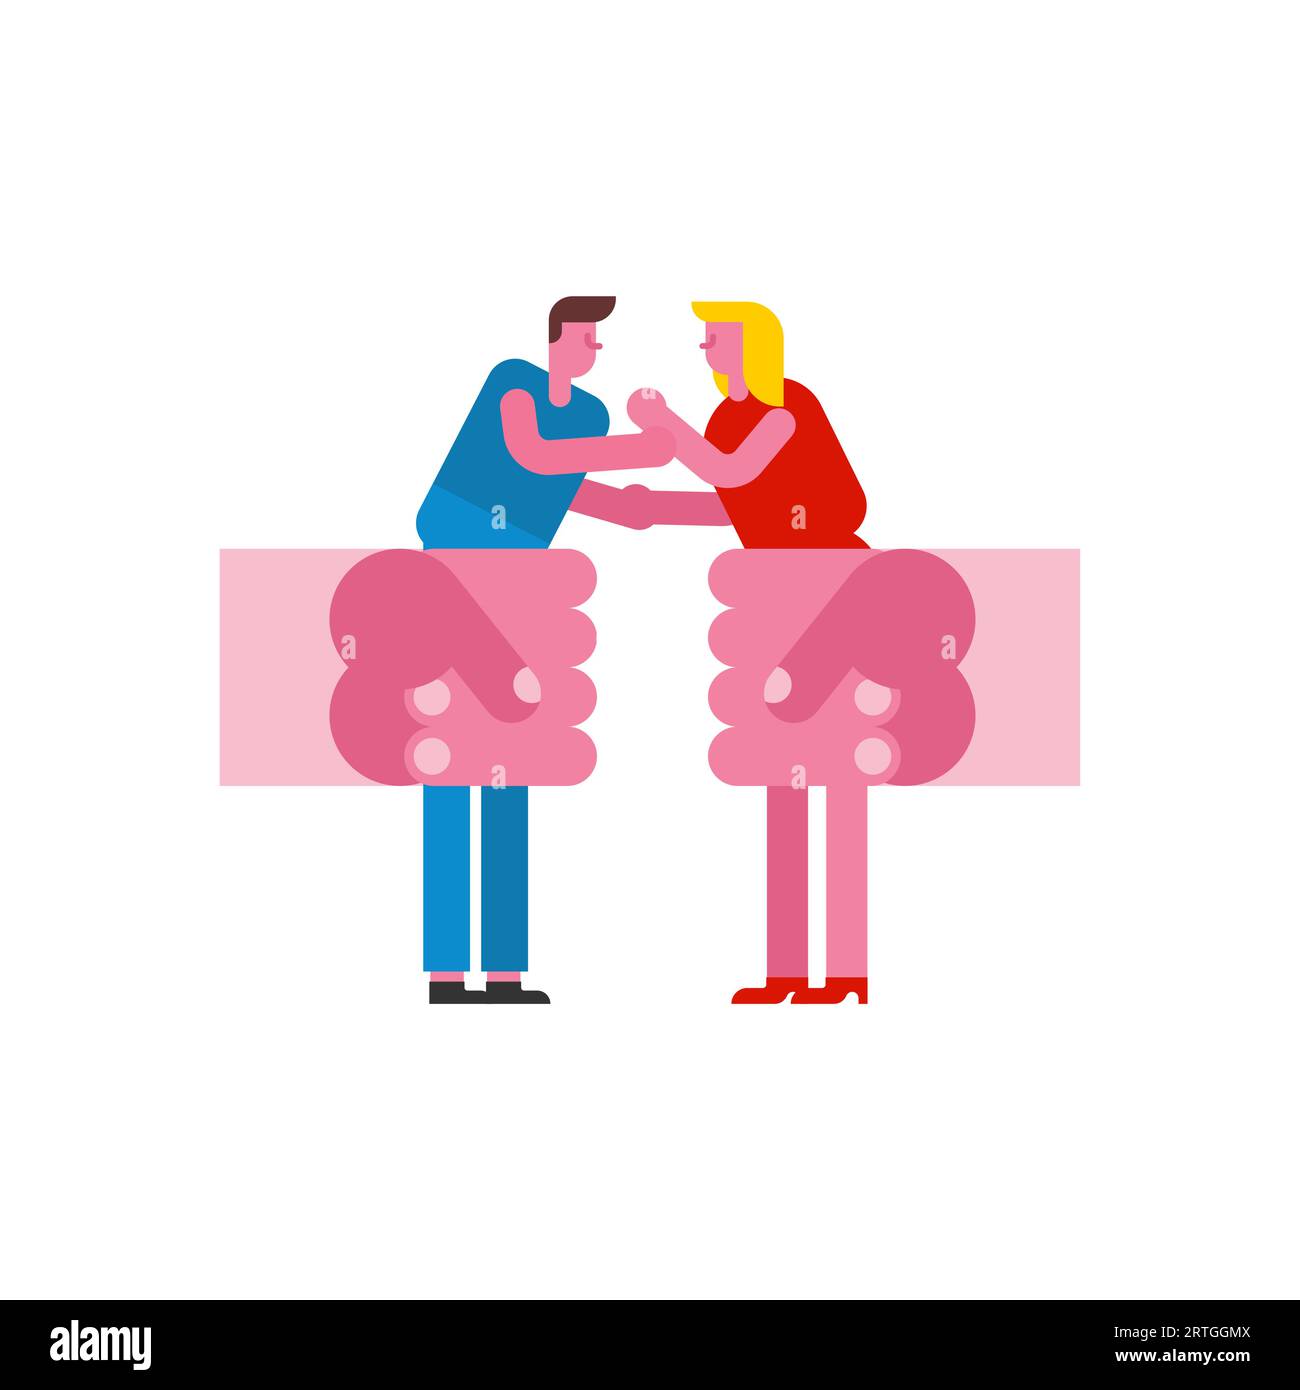 Matchmaking. Two hands hold a man and a woman and introduce them to each other. Concept for a dating site. Stock Vector